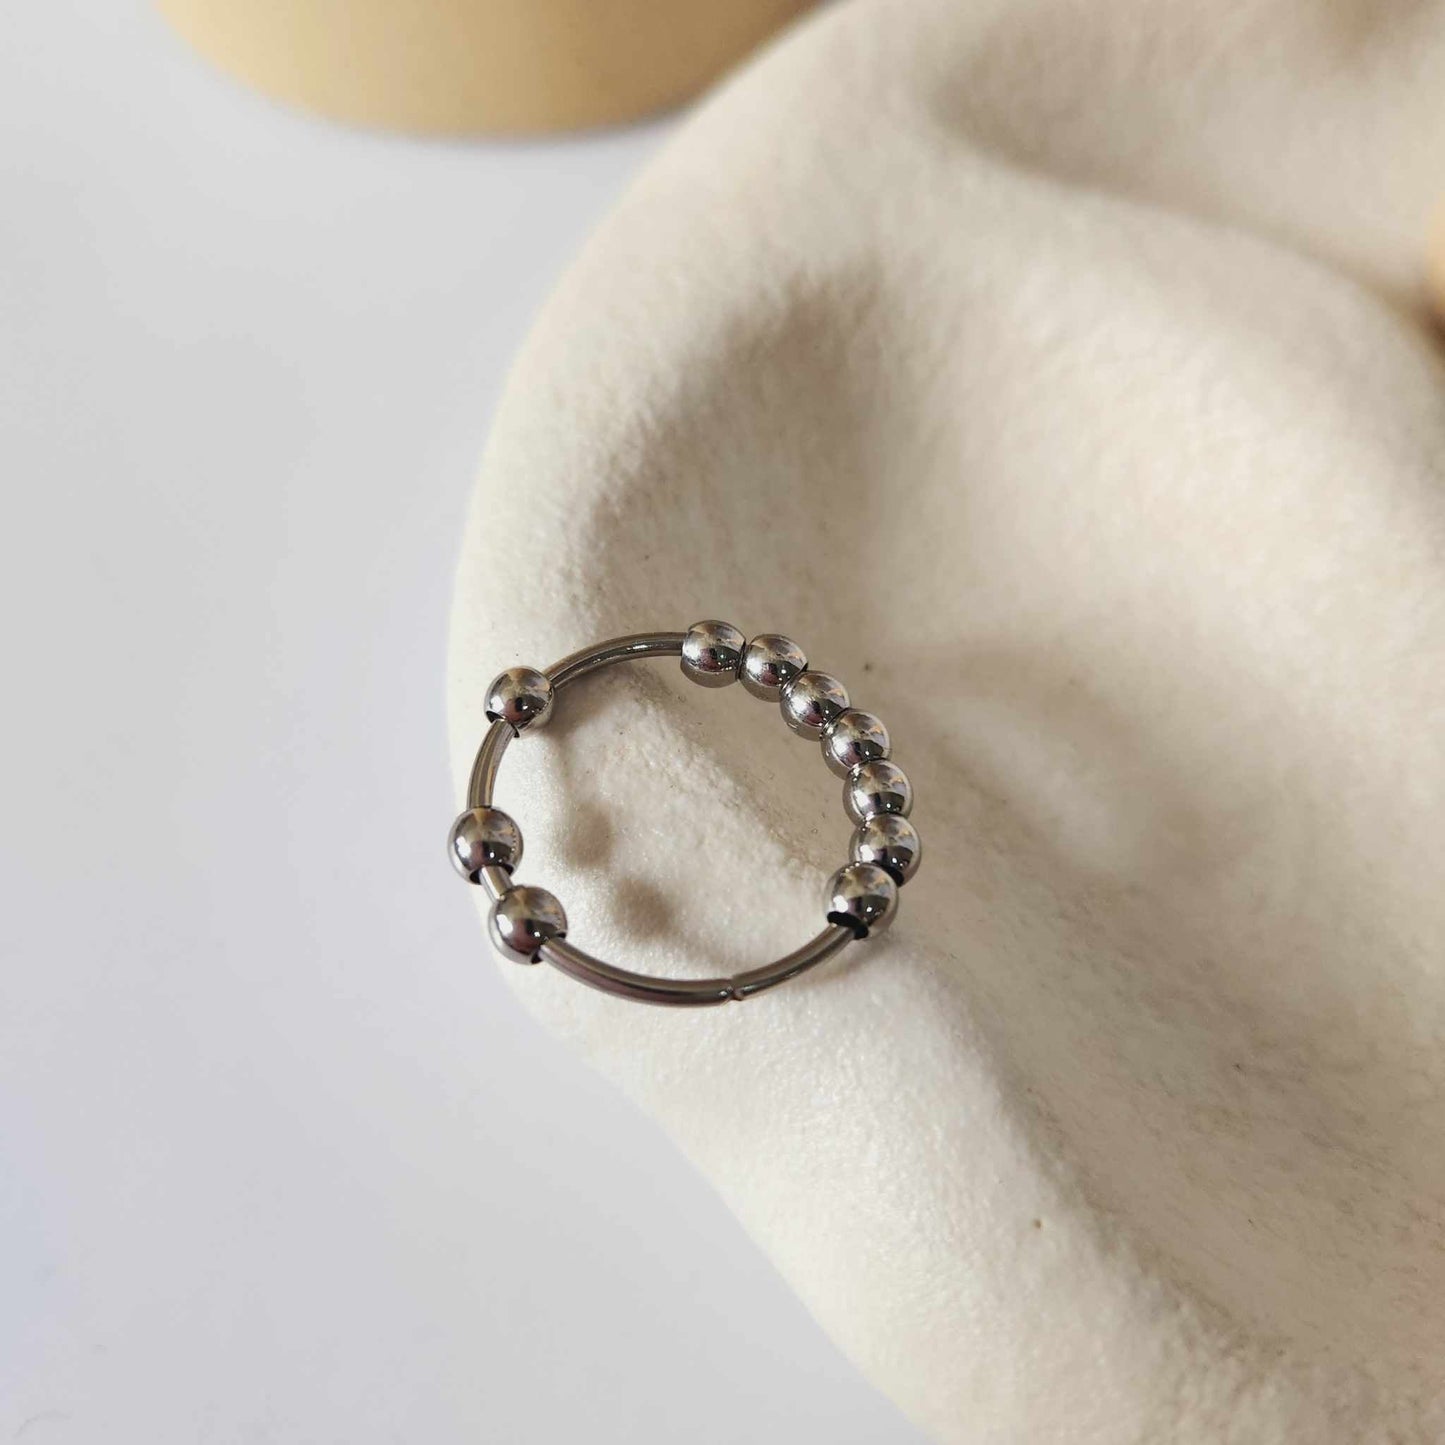 10 Beaded Ring - Silver Fidget Anxiety Ring